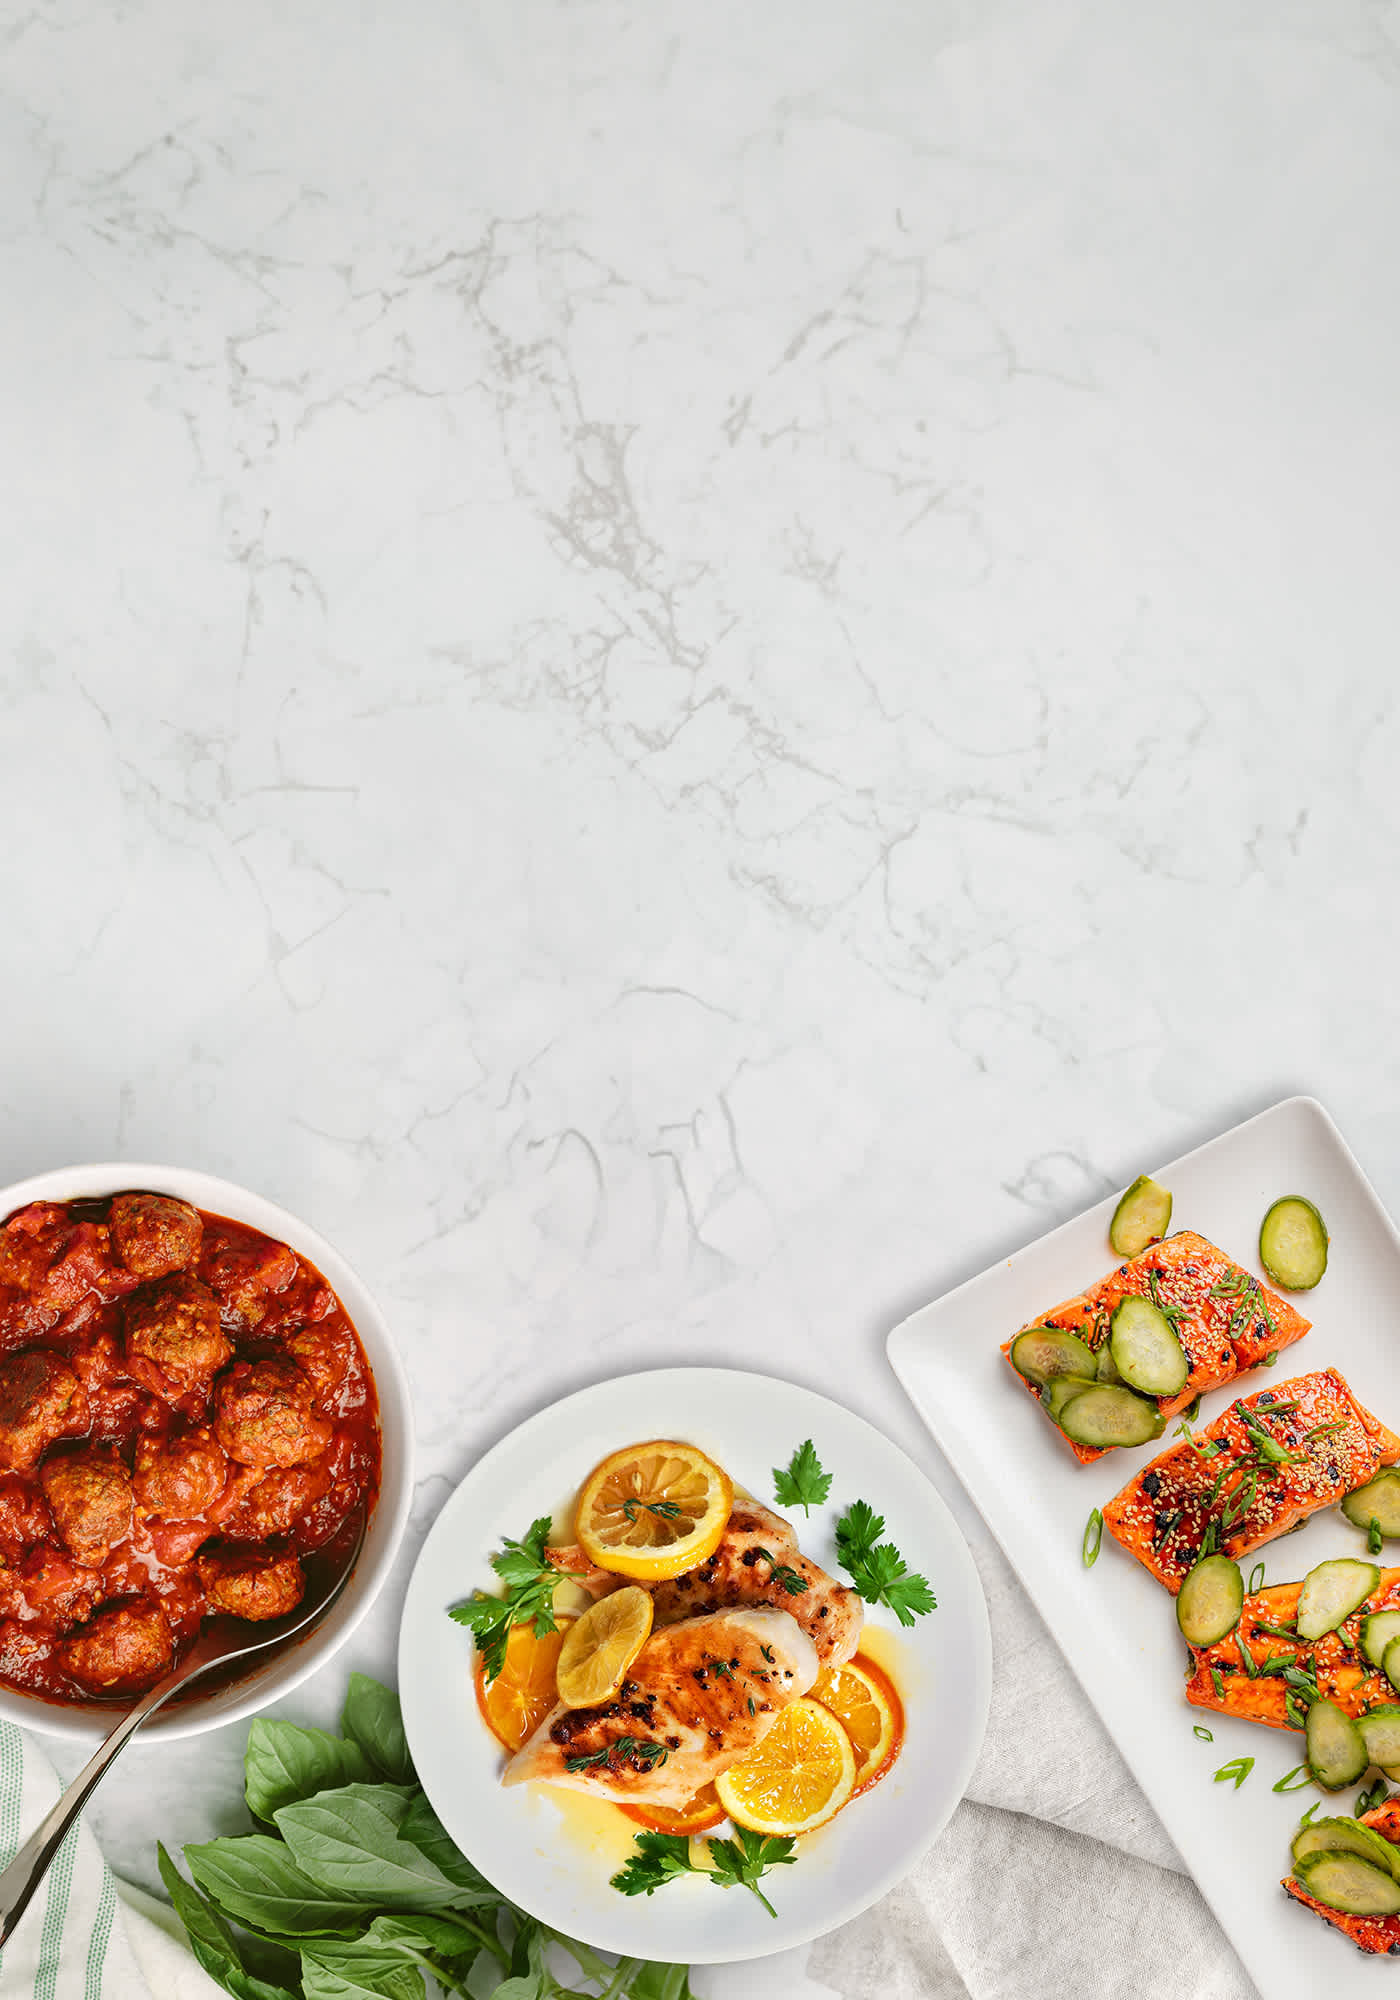 Three plates of food on a marble background